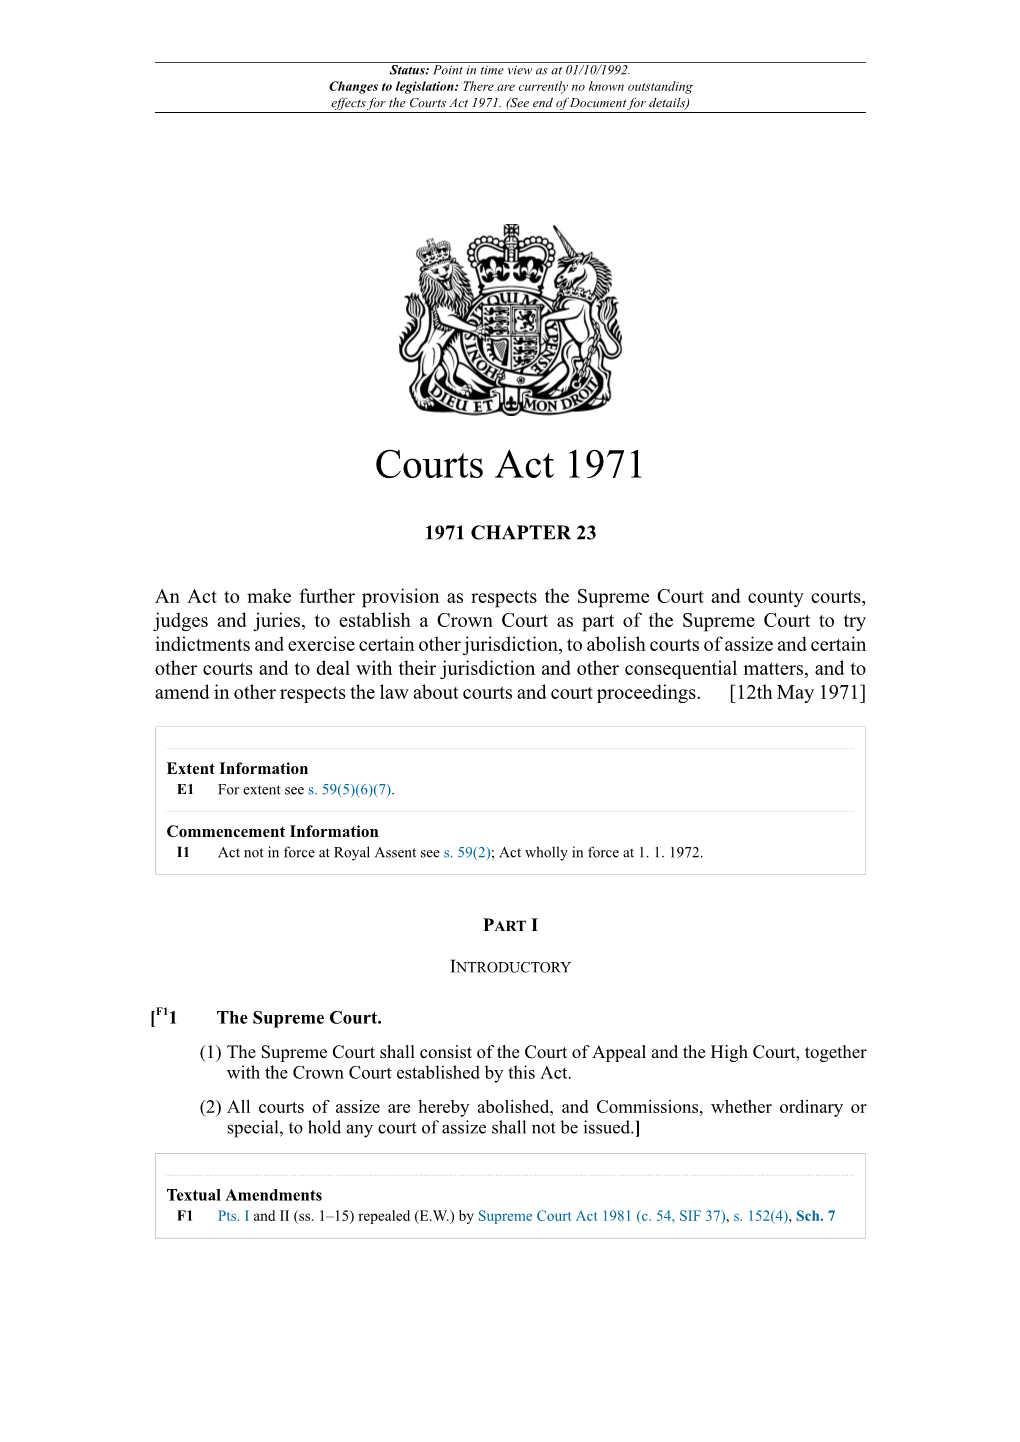 Courts Act 1971